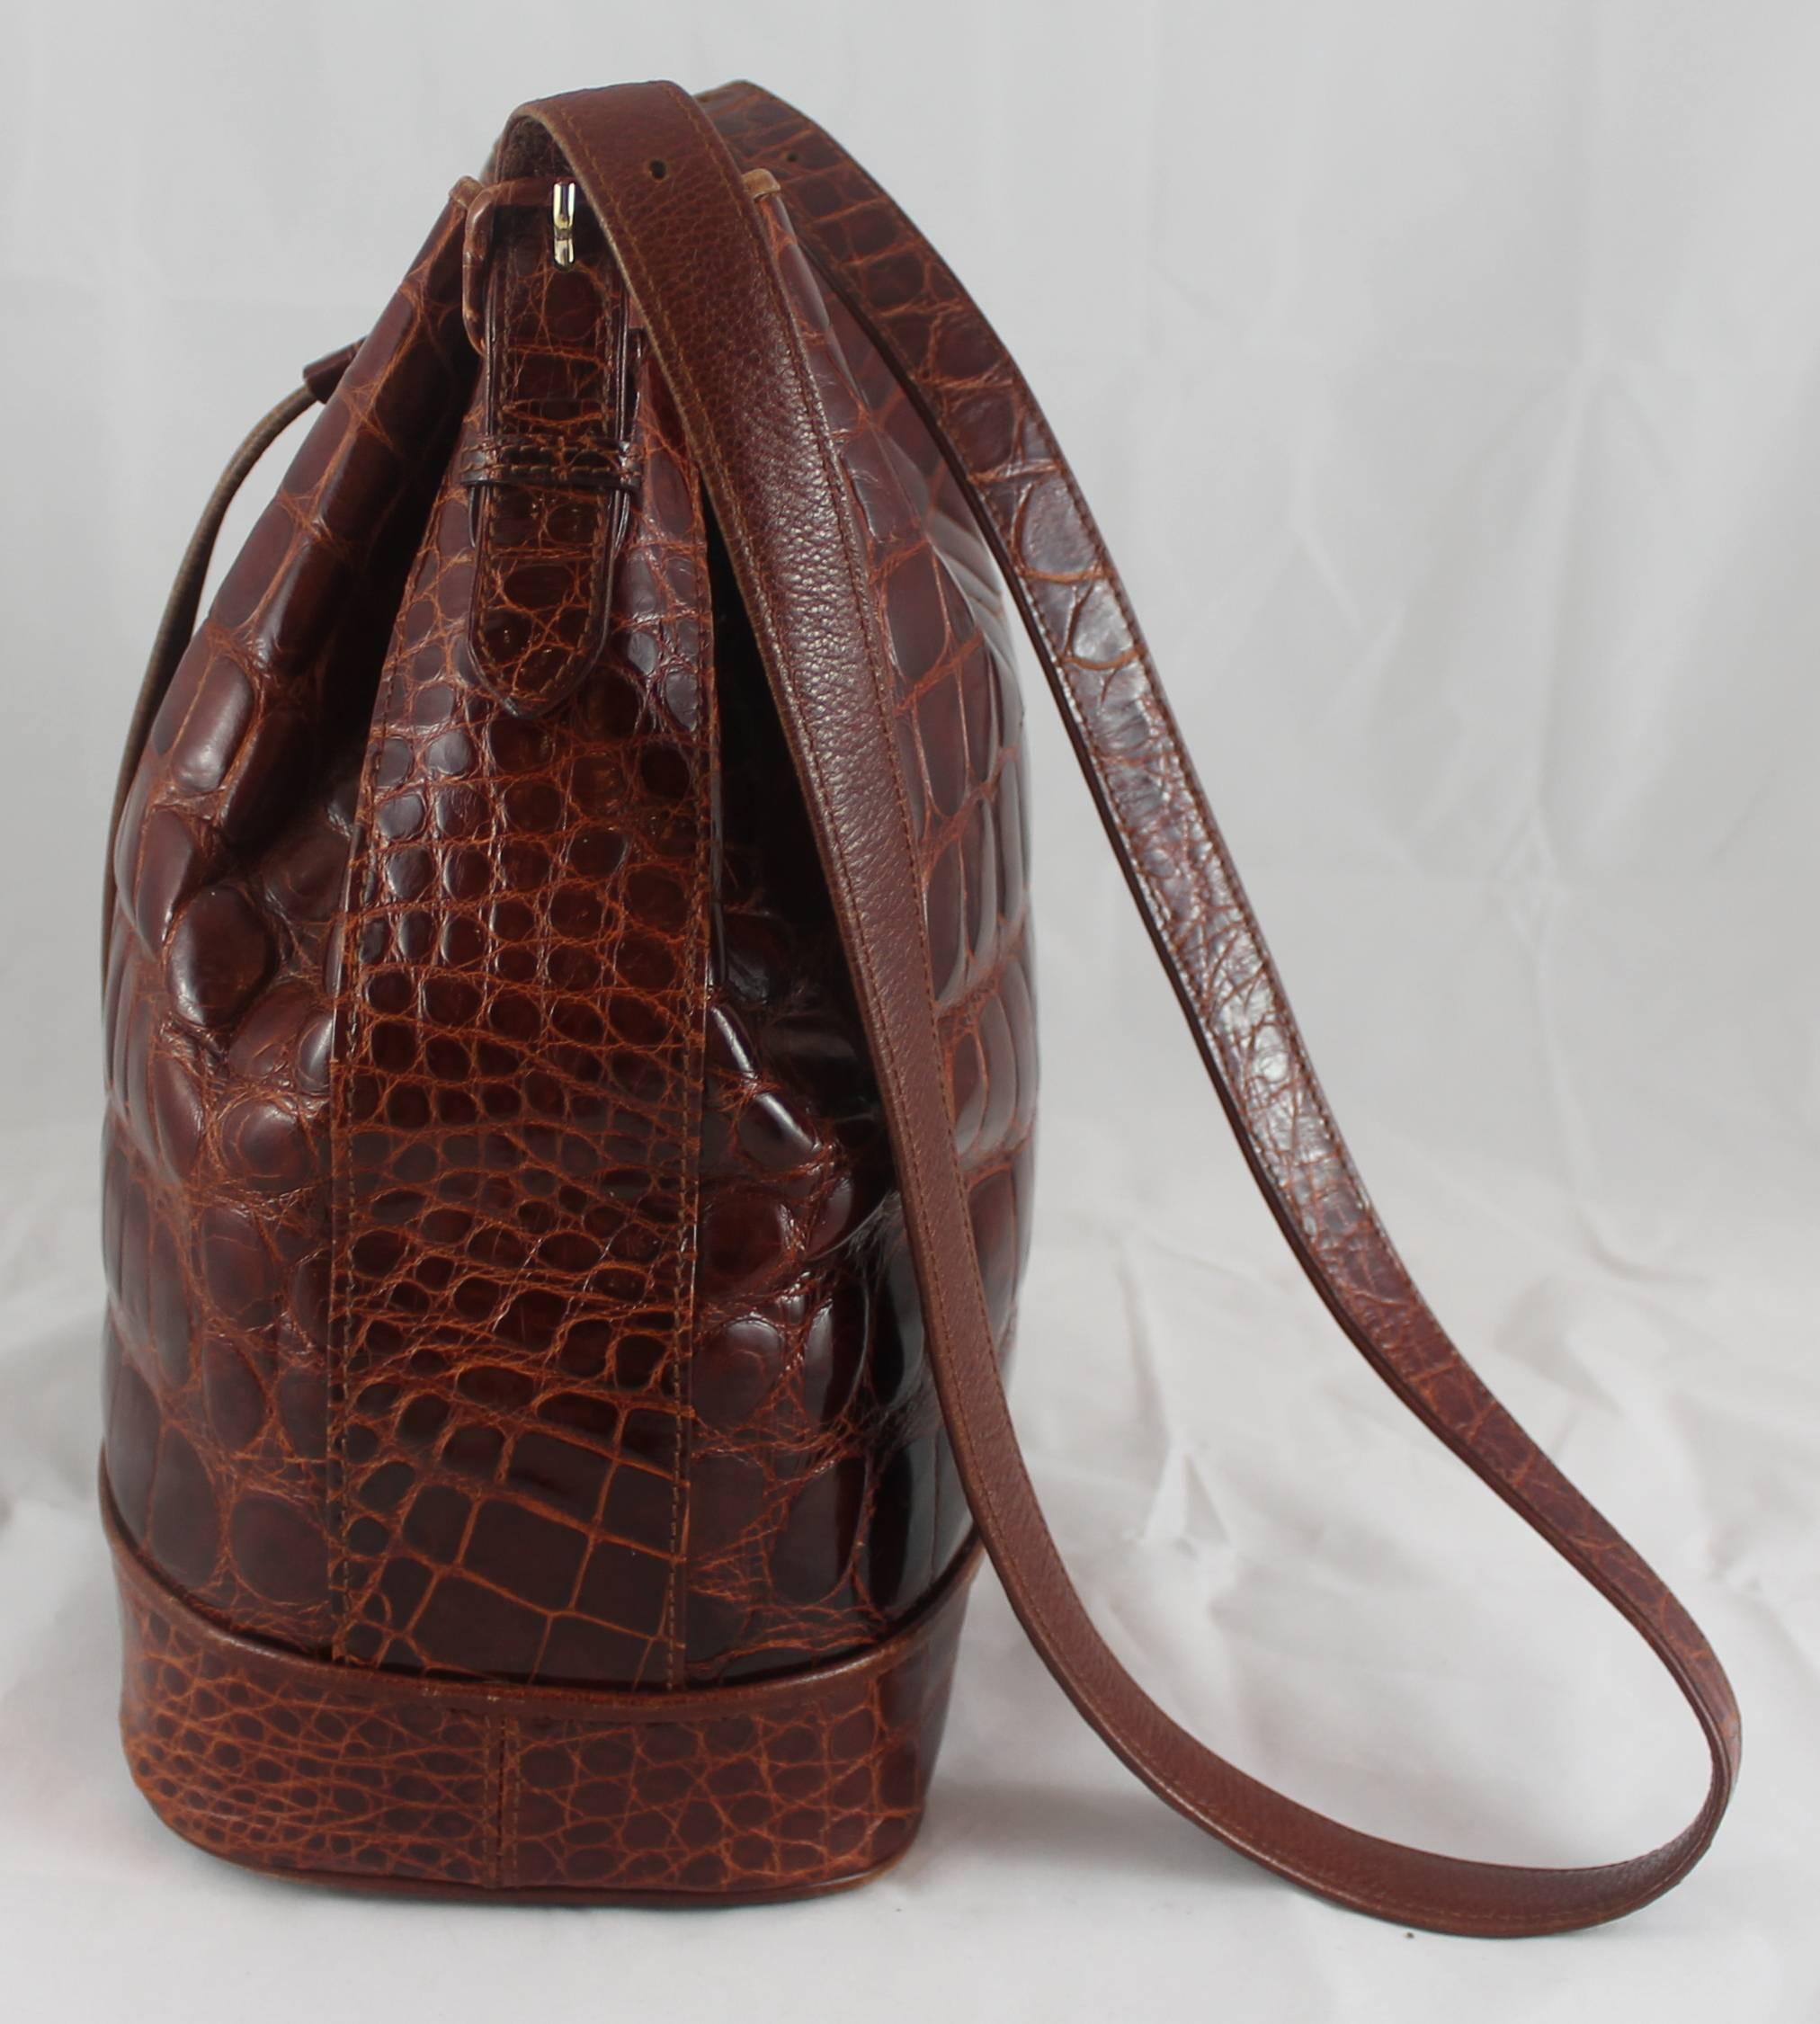 Lana Marks Russet Crocodile Drawstring Bucket Bag. This bag is in good condition with general wear to the bottom, some wear on the buckles, and overall light use. This very trendy bag is unique and is great fro every day. The inside is made of suede